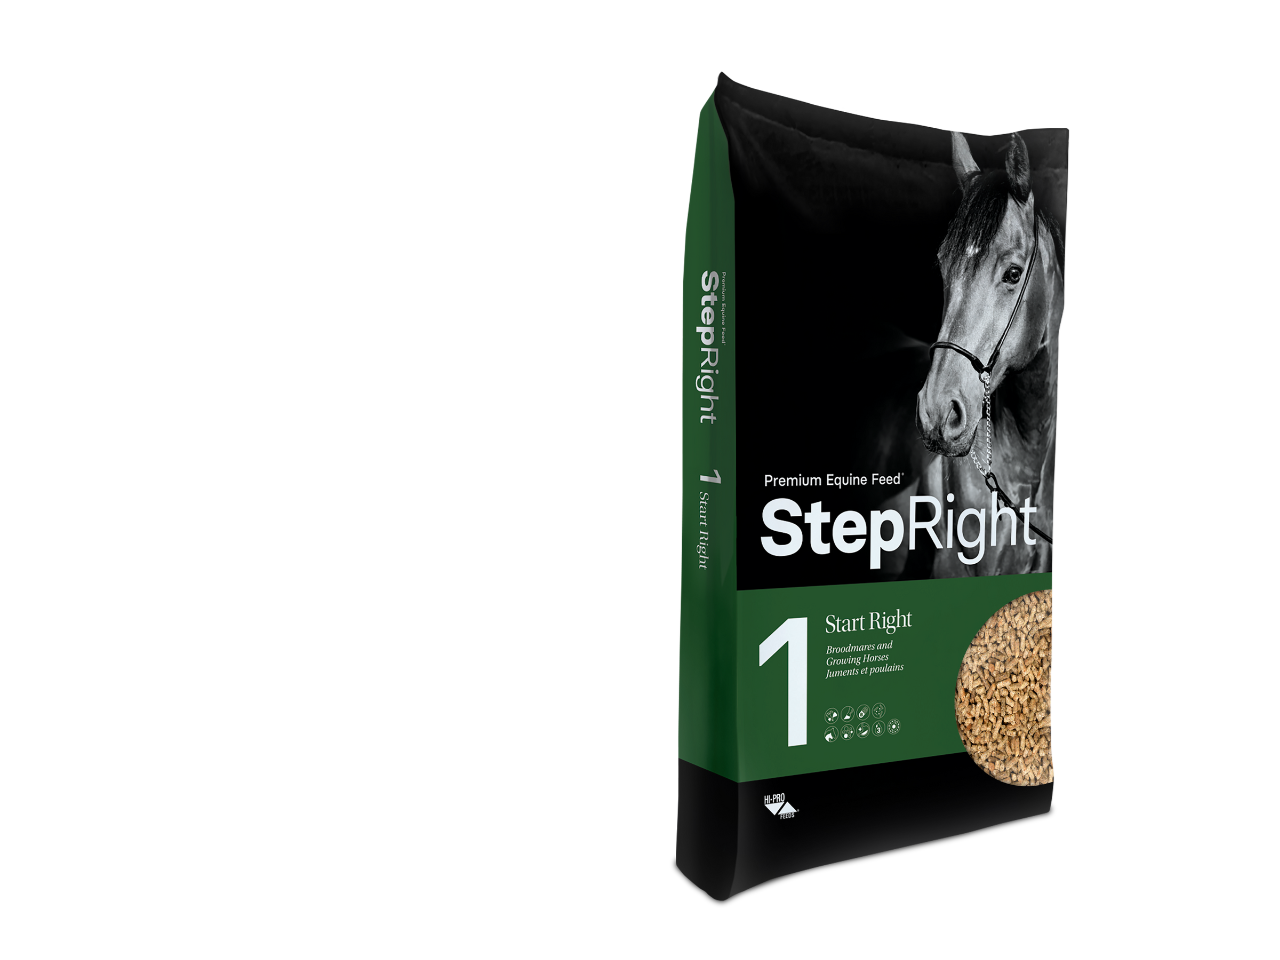 A black and green bag of Step Right horse feed featuring a picture of a horse